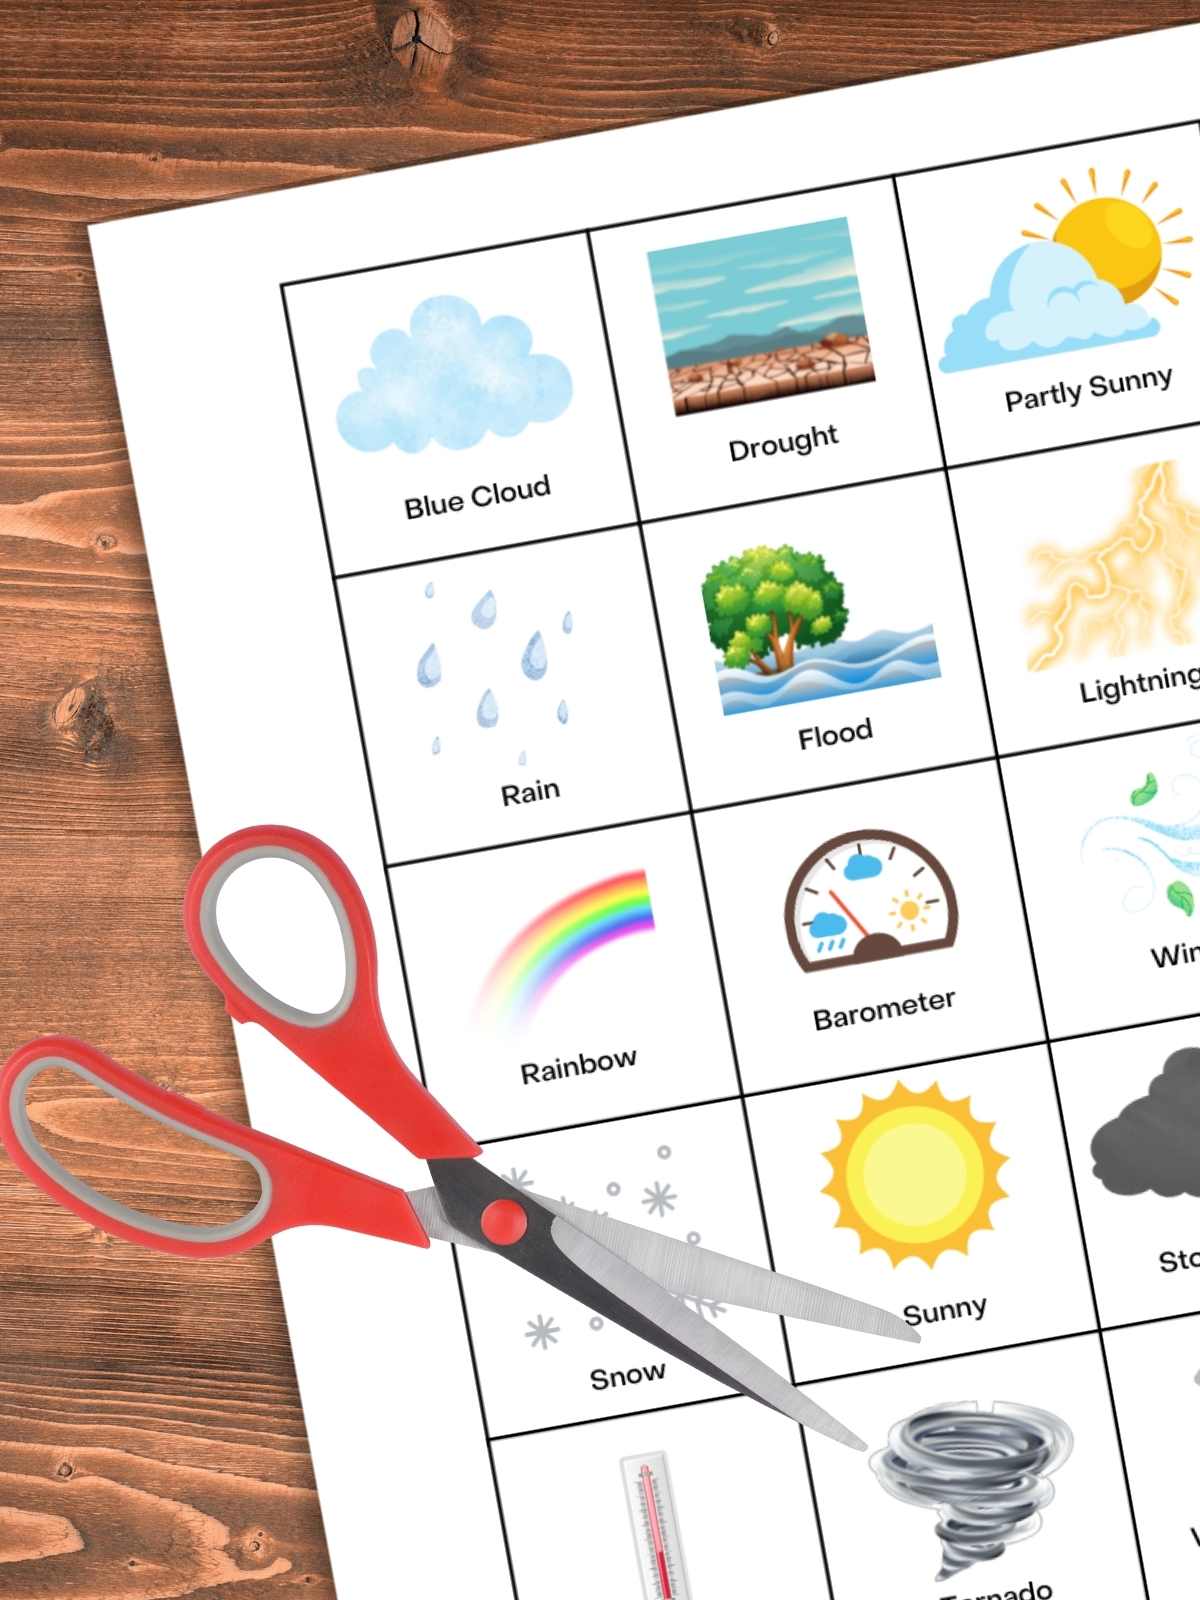 bingo calling cards with images of weather events and tools label under the images. Red scissors on top of printable on a wooden background